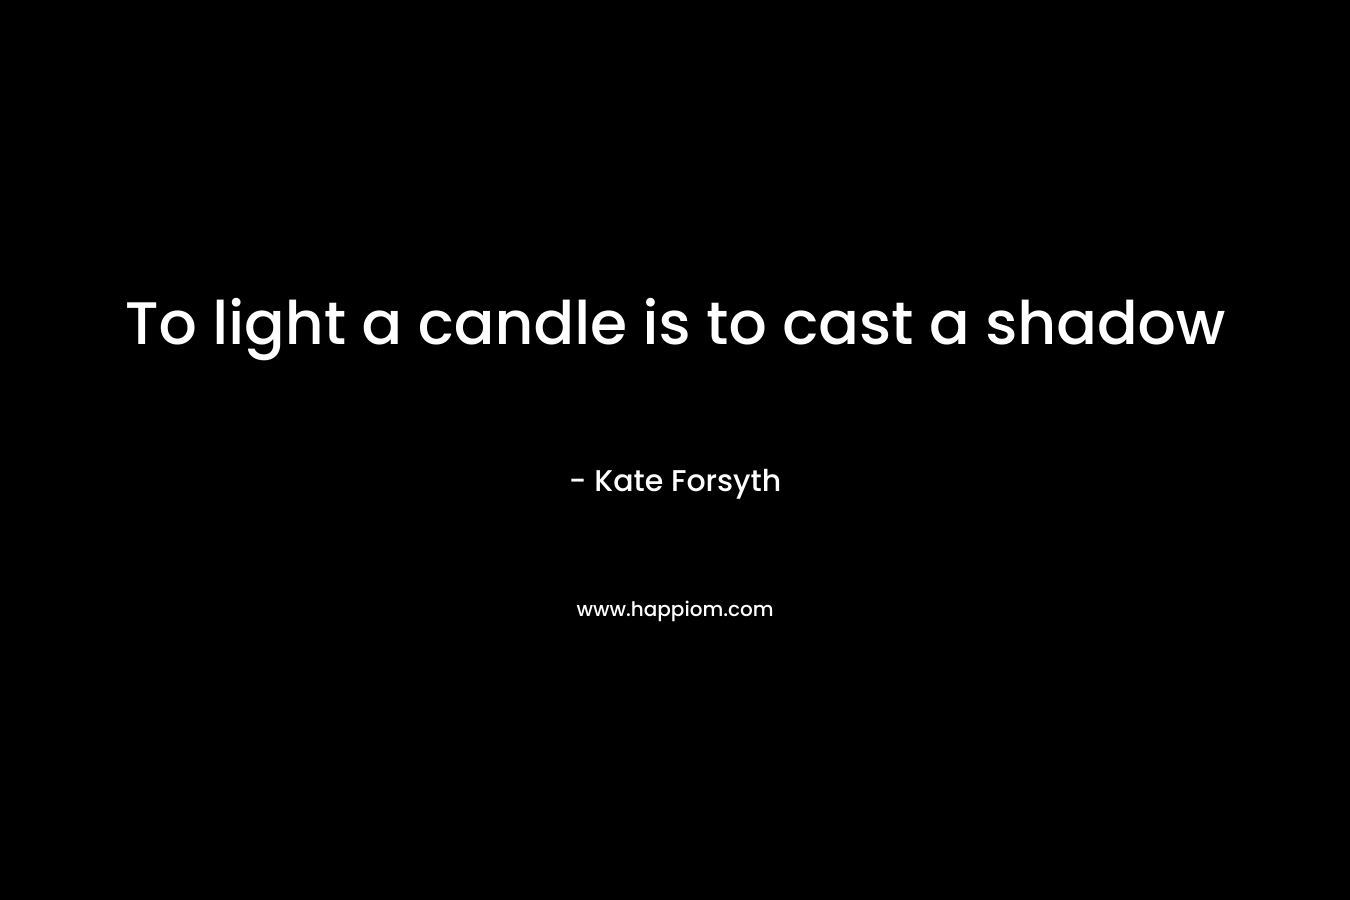 To light a candle is to cast a shadow